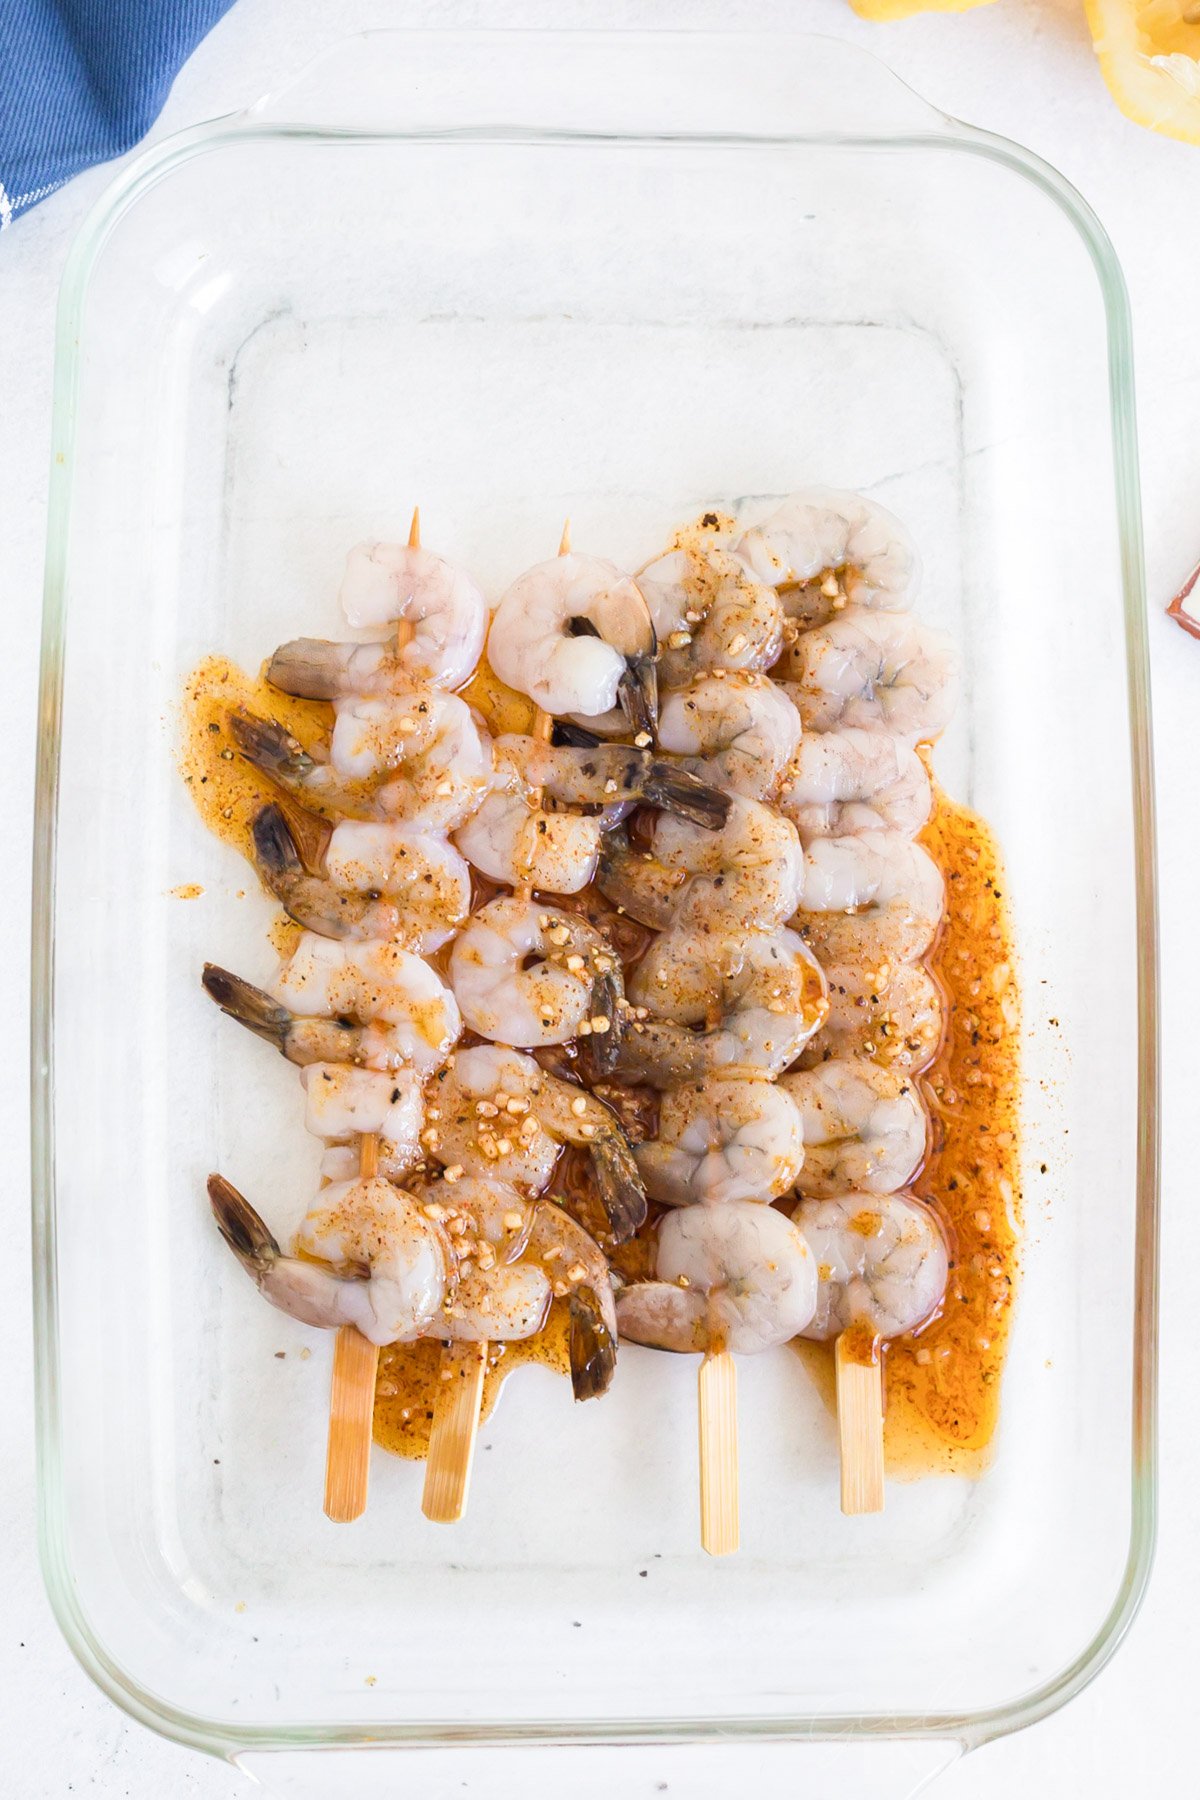 Shrimp skewers with marinade sauce drizzled over them, in a glass casserole dish.